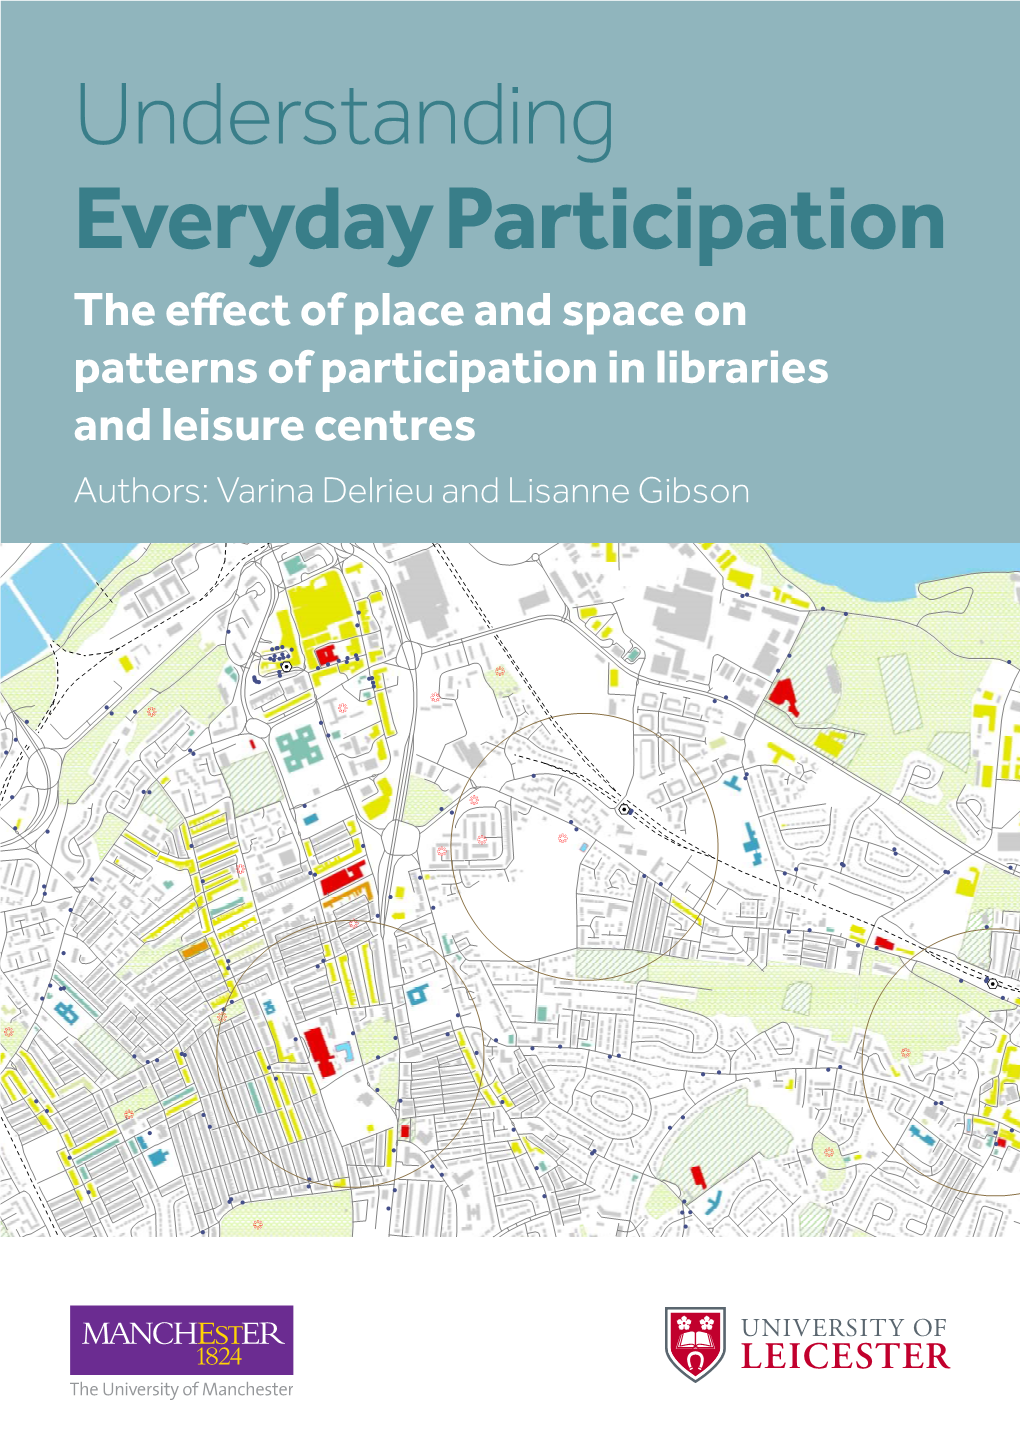 The Effect of Place and Space on Patterns of Participation in Libraries and Leisure Centres